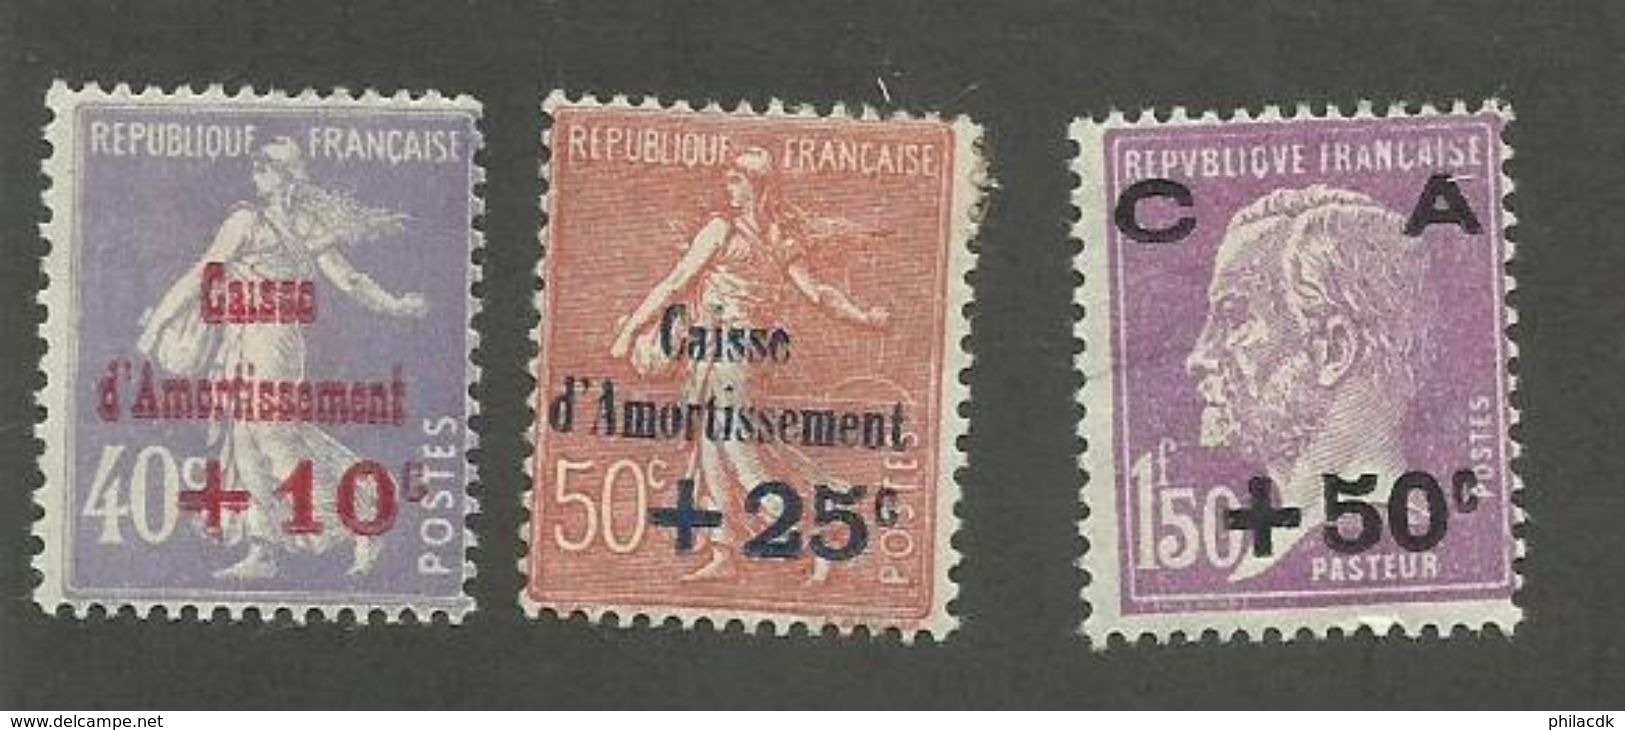 FRANCE - N°YT 249/51 NEUFS* AVEC CHARNIERE - COTE YT : 107€ - 1928 - Unused Stamps